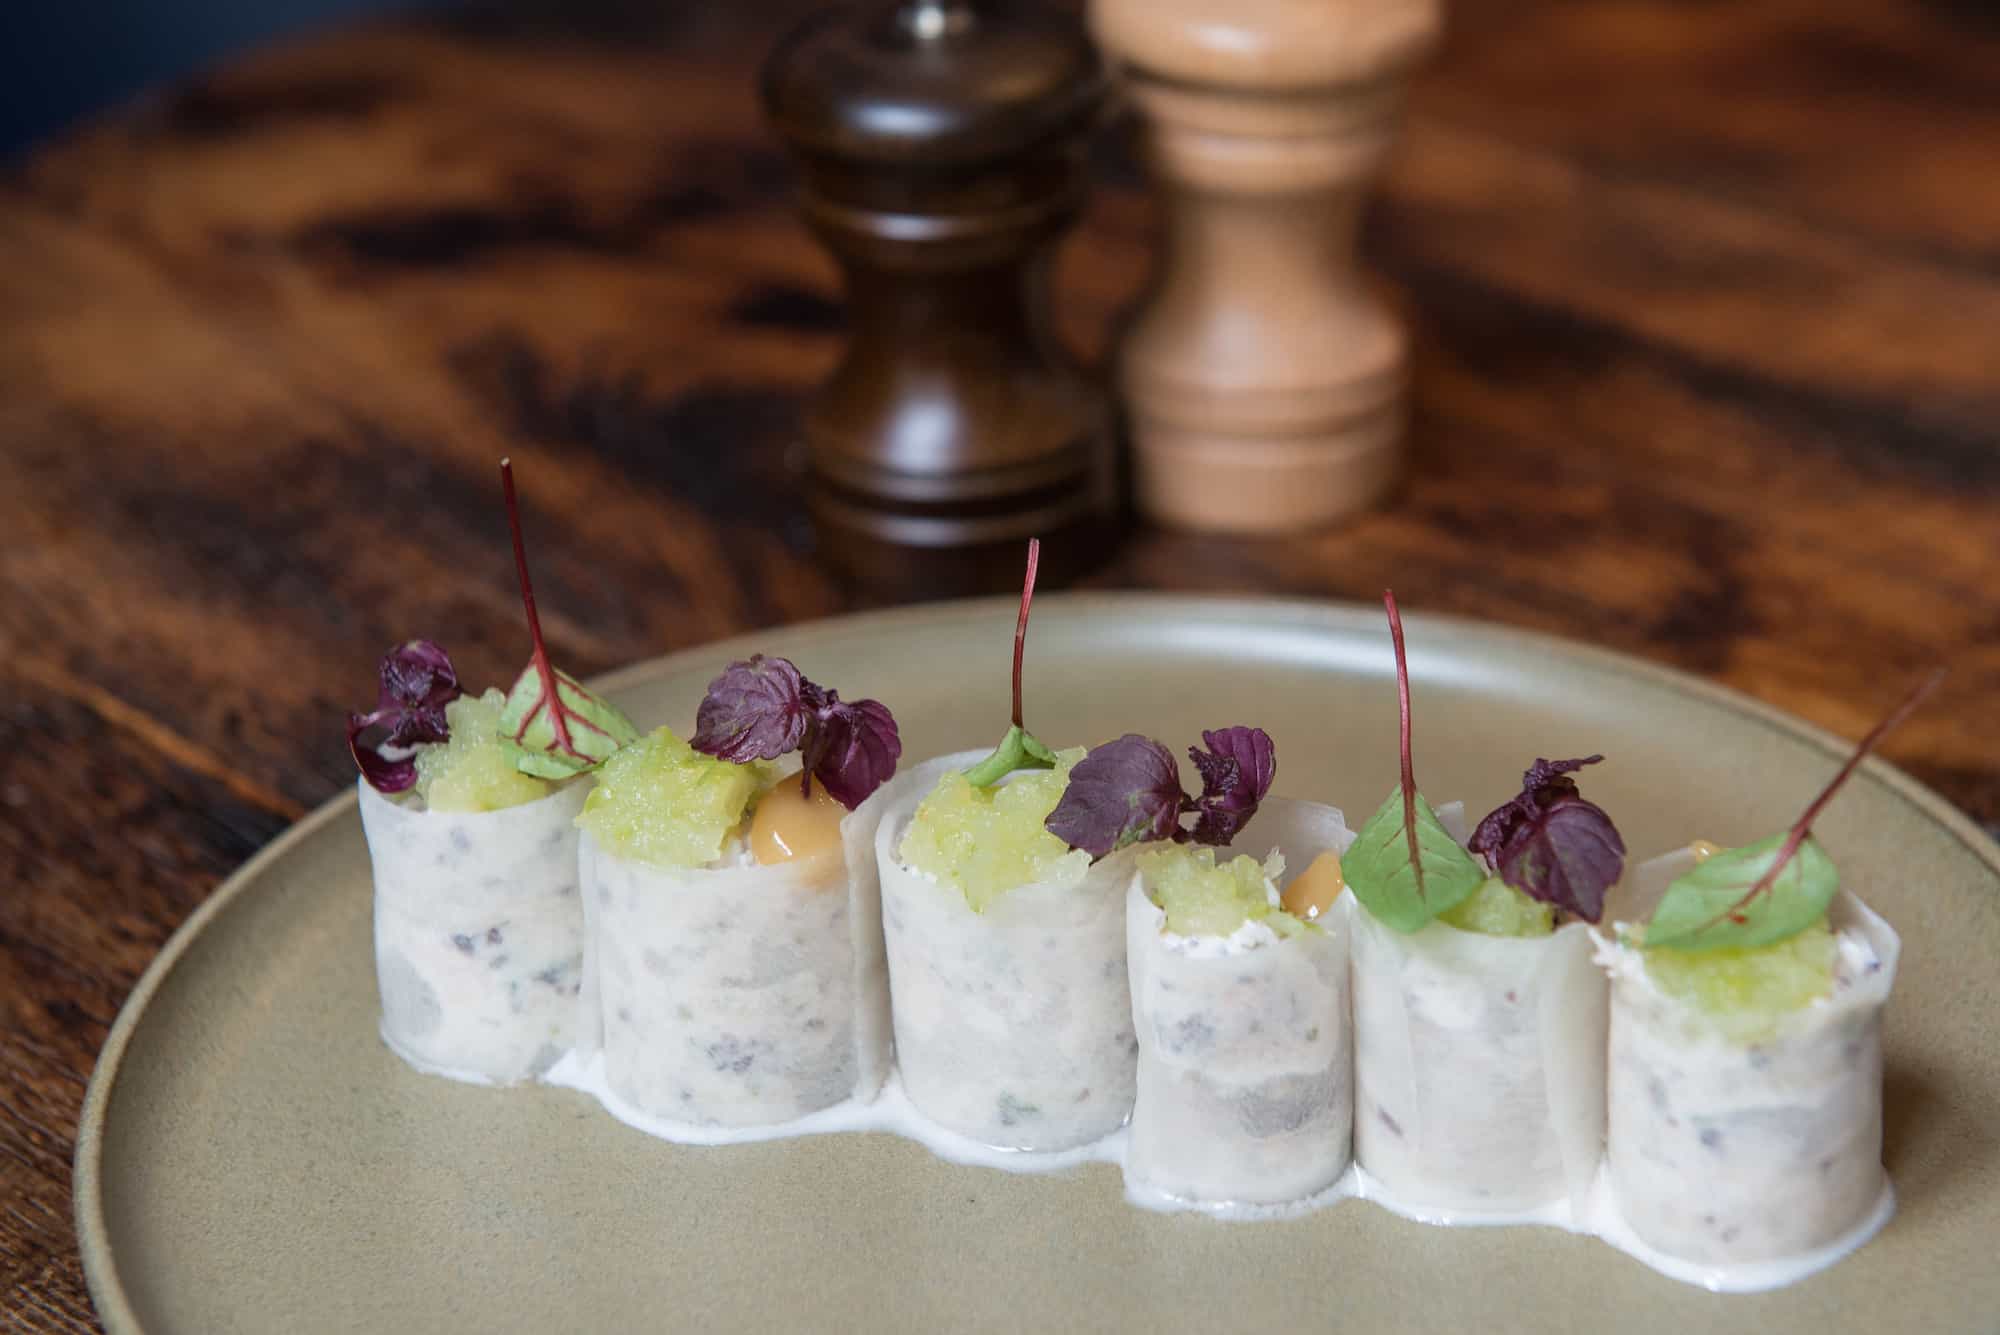 A favorite restaurant in Paris for fresh fish, Belle Maison serves original dishes like these delicate ceviche fish rolls.